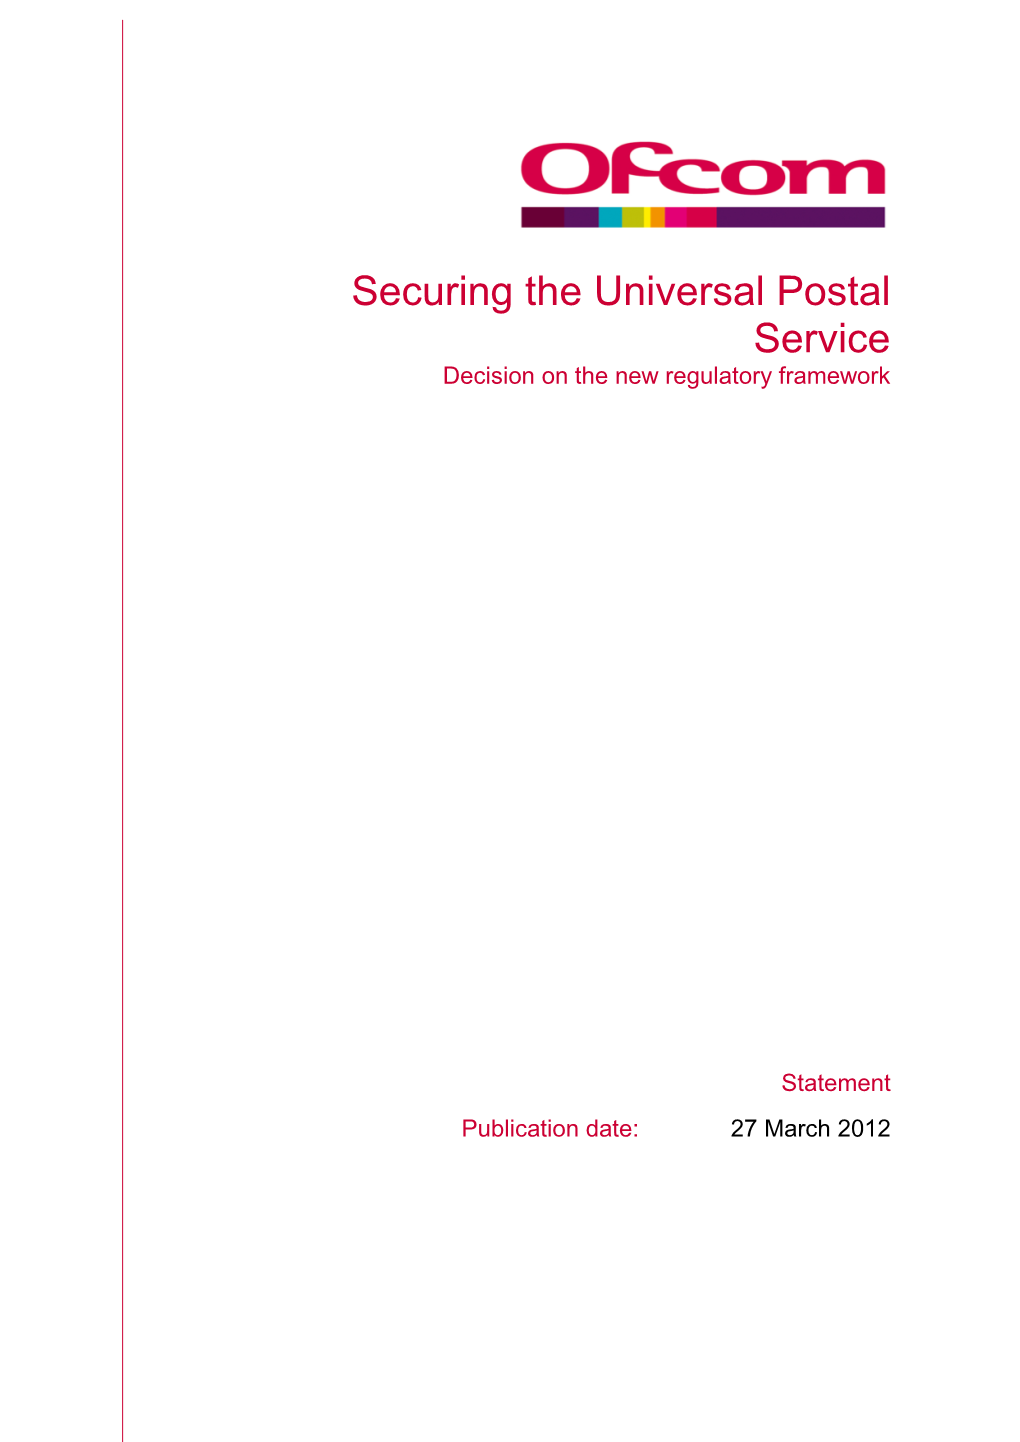 Statement: Securing the Universal Postal Service